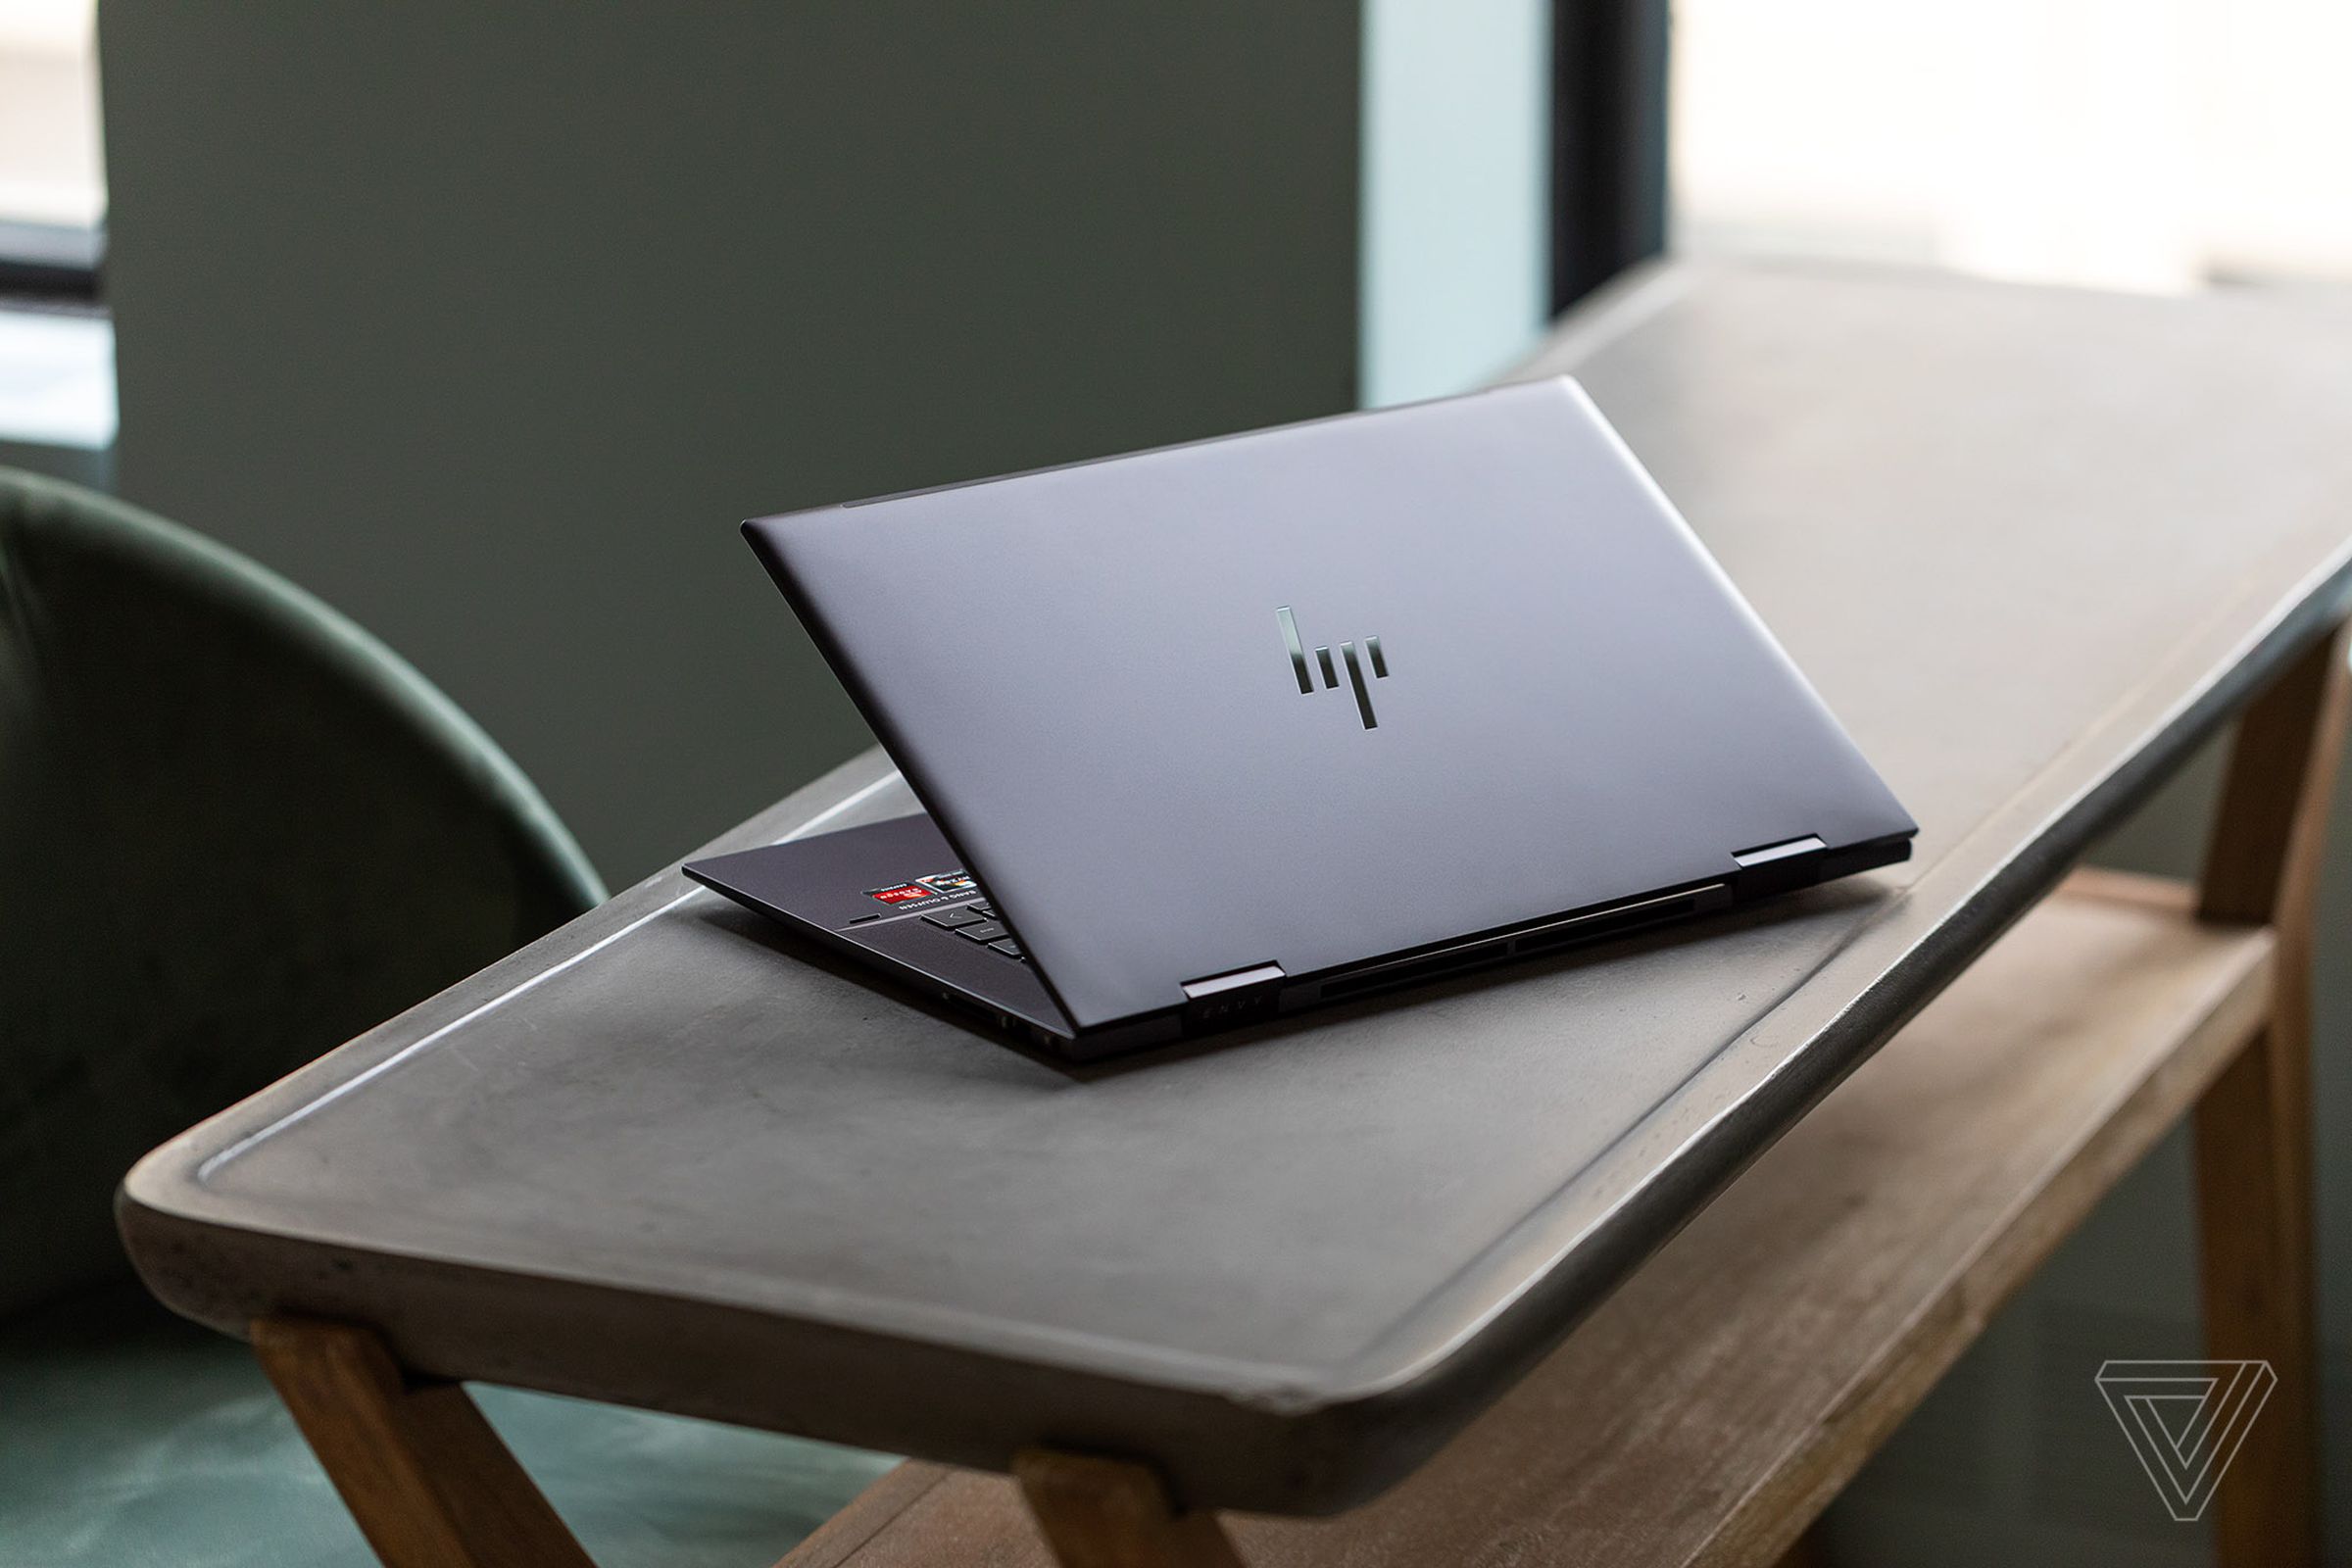 The HP Envy x360 15 half open on a table.